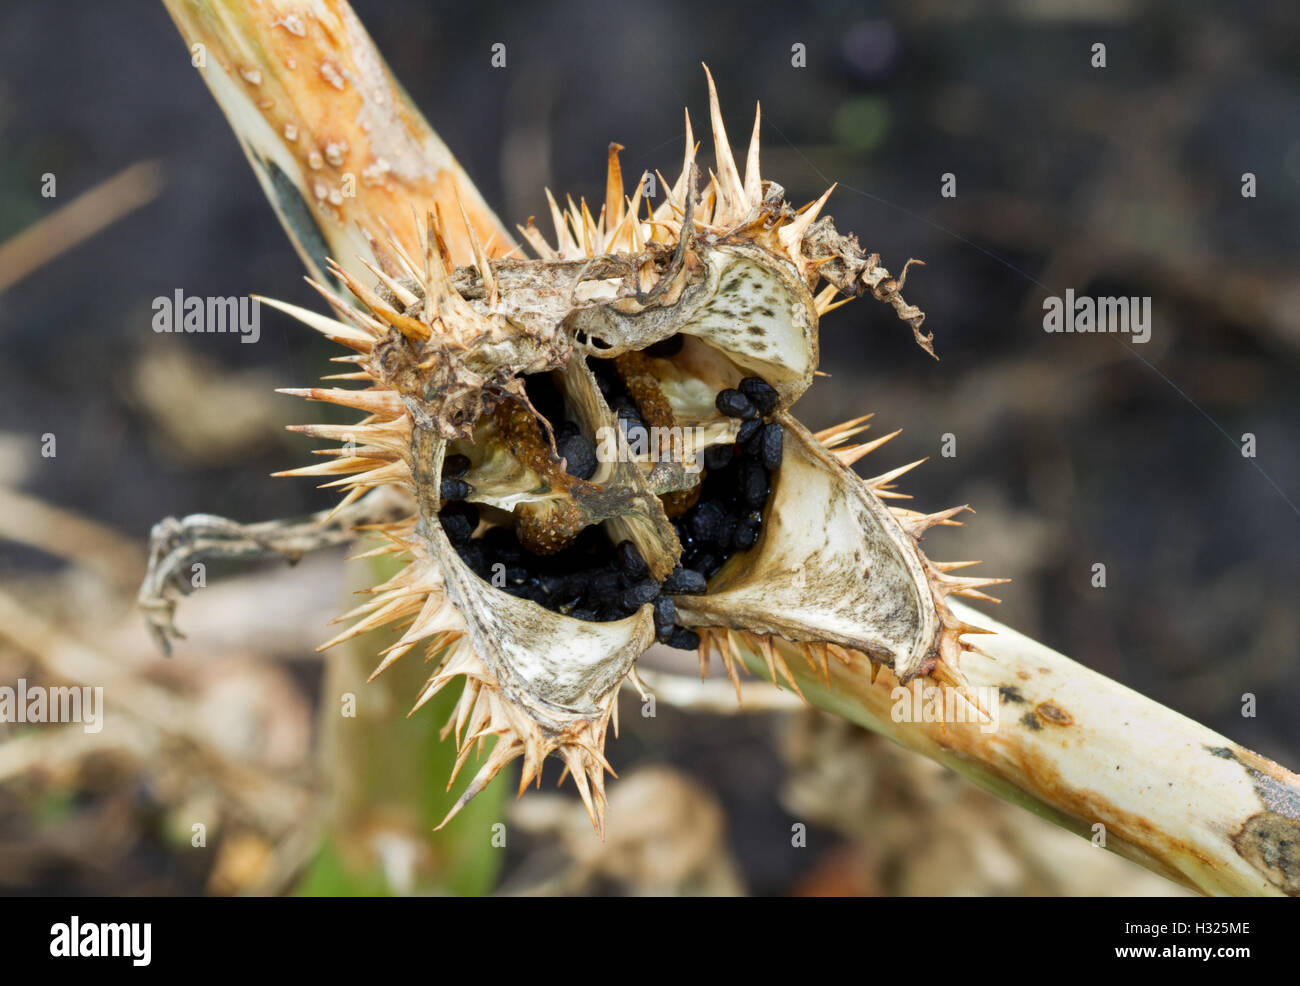 Seed capsule of Thornapple (Datura stramonium), also known as Jimson weed or Devil’s snare Stock Photo